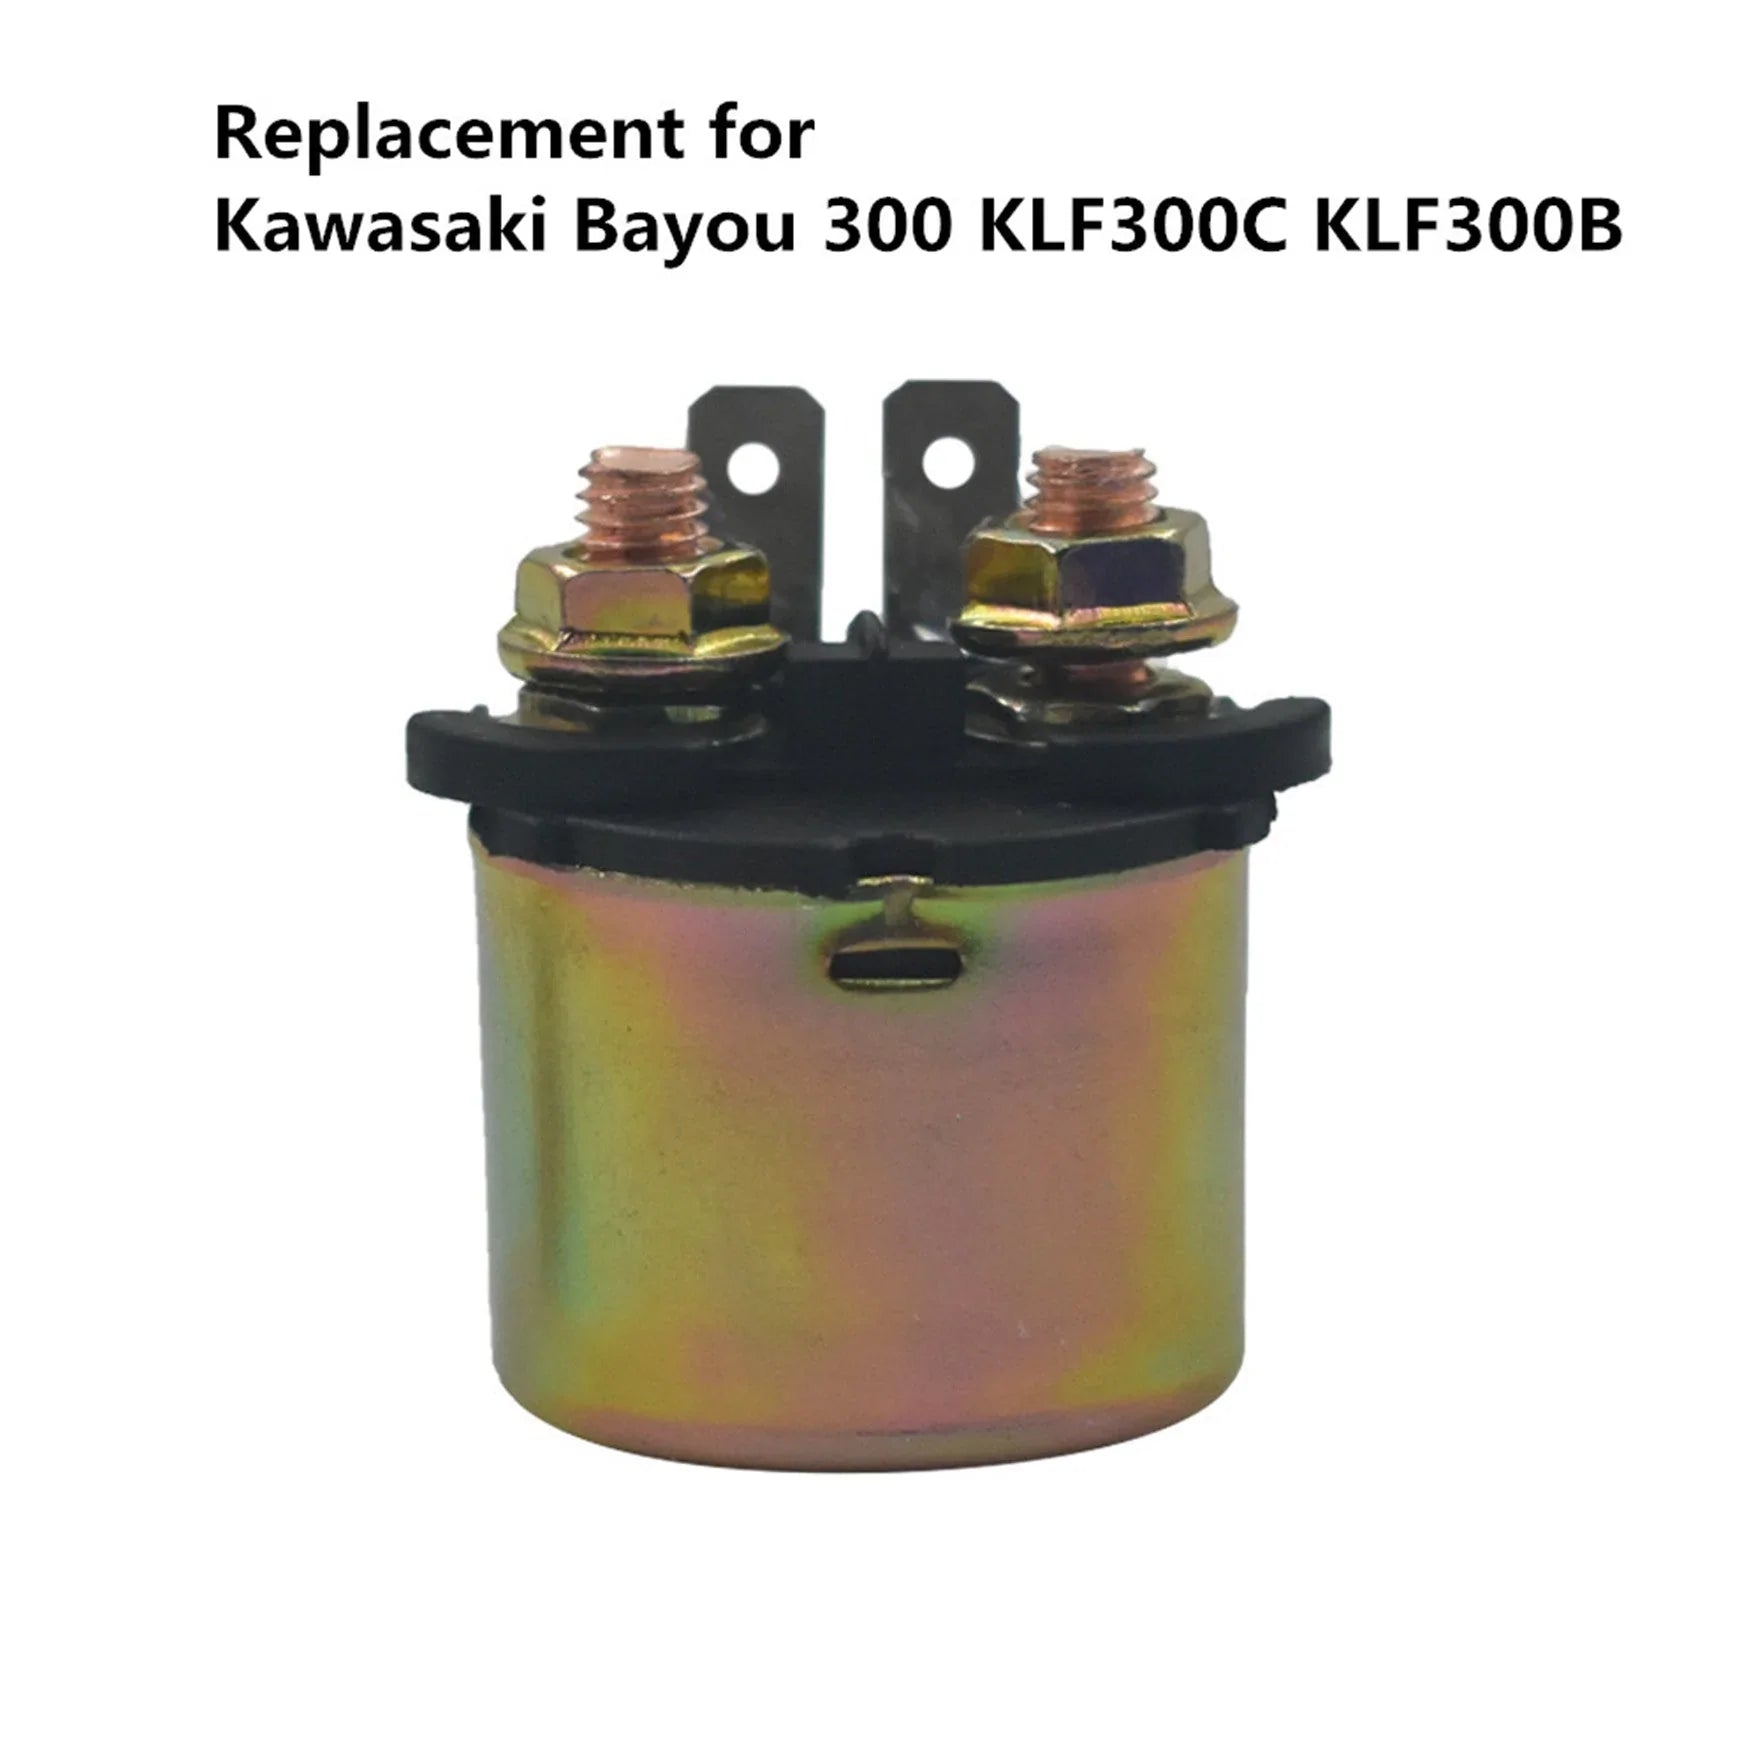 labwork Solenoid Relay Starter Fit for 1989-2002 Kawasaki Bayou 300 KLF300C 4x4 / 1992-2001 Kawasaki Bayou 300 KLF300B LAB WORK MOTO